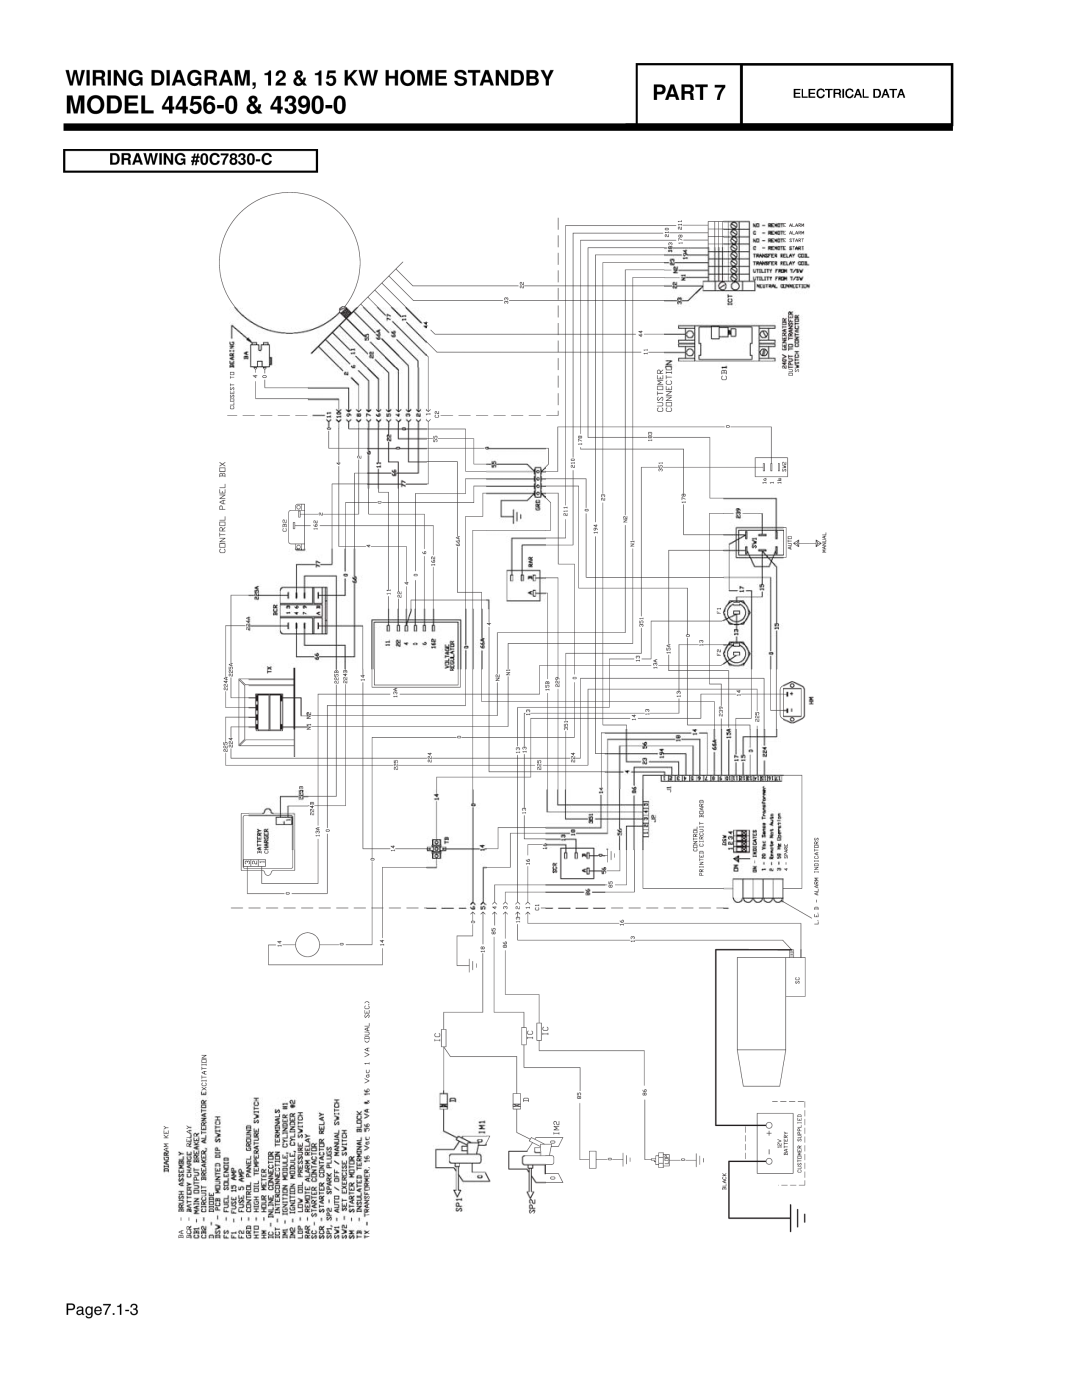 Guardian Technologies 4390 MODEL 4456-0, WIRING DIAGRAM, 12 & 15 KW HOME STANDBY, Part, DRAWING #0C7830-C, Electrical Data 